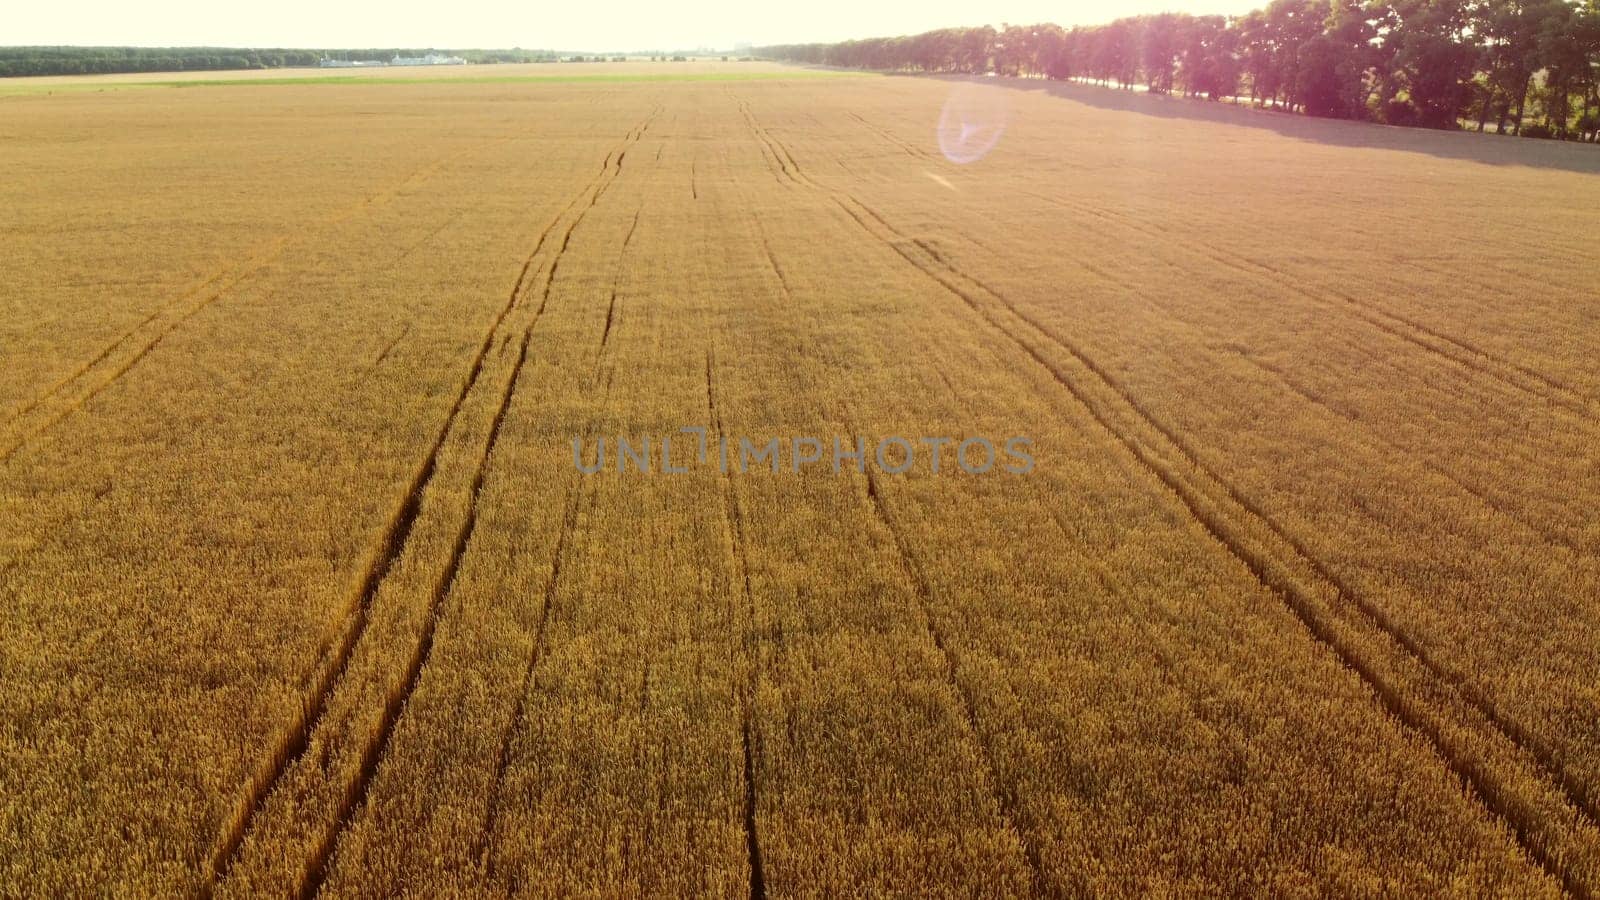 Flying over field of yellow ripe wheat, dawn sunset. Natural background. Rural countryside scenery. Agricultural landscape. Aerial drone view flight over ears of wheat grains. Ripe harvest. Top view